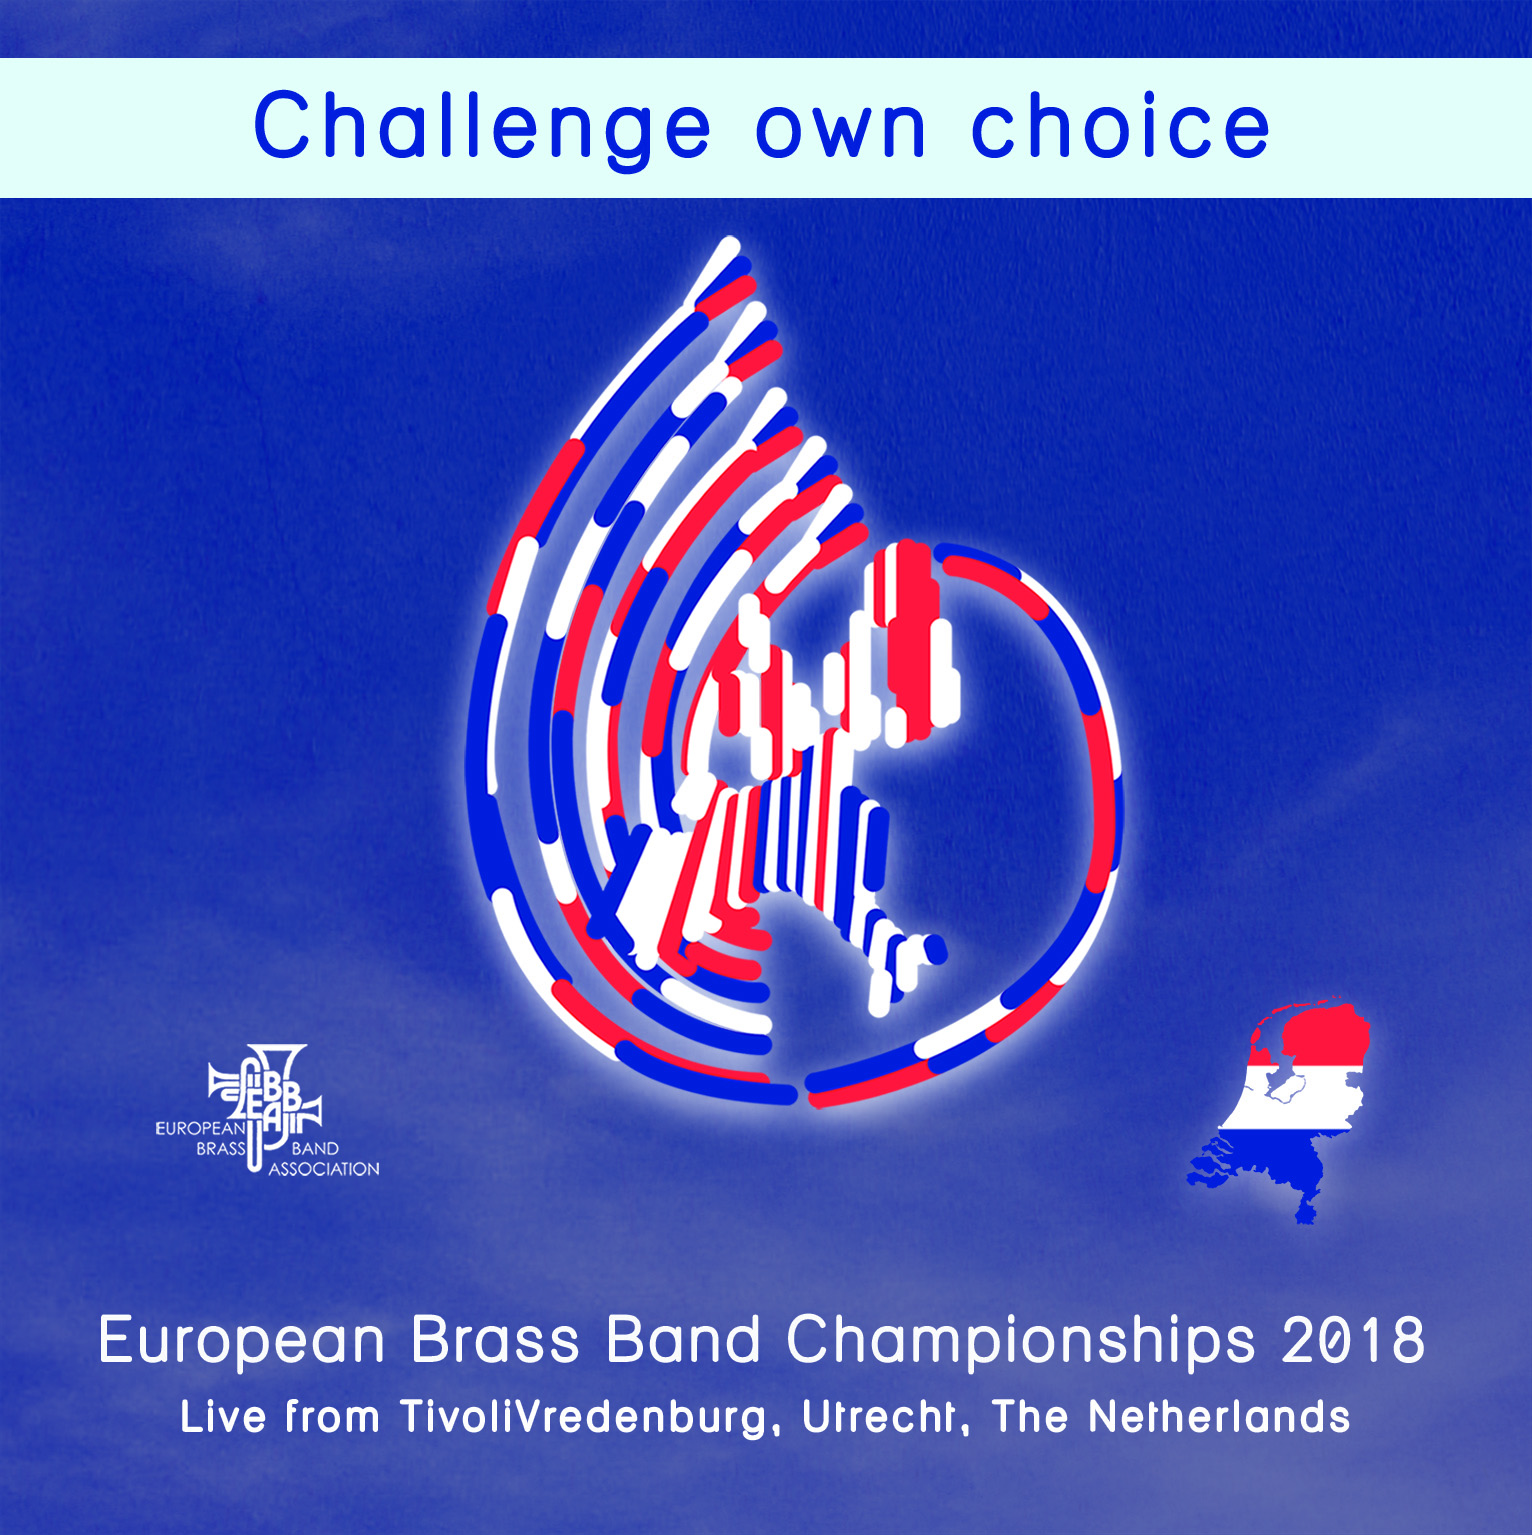 European Brass Band Championships 2018 - Challenge Section Own Choice - Download